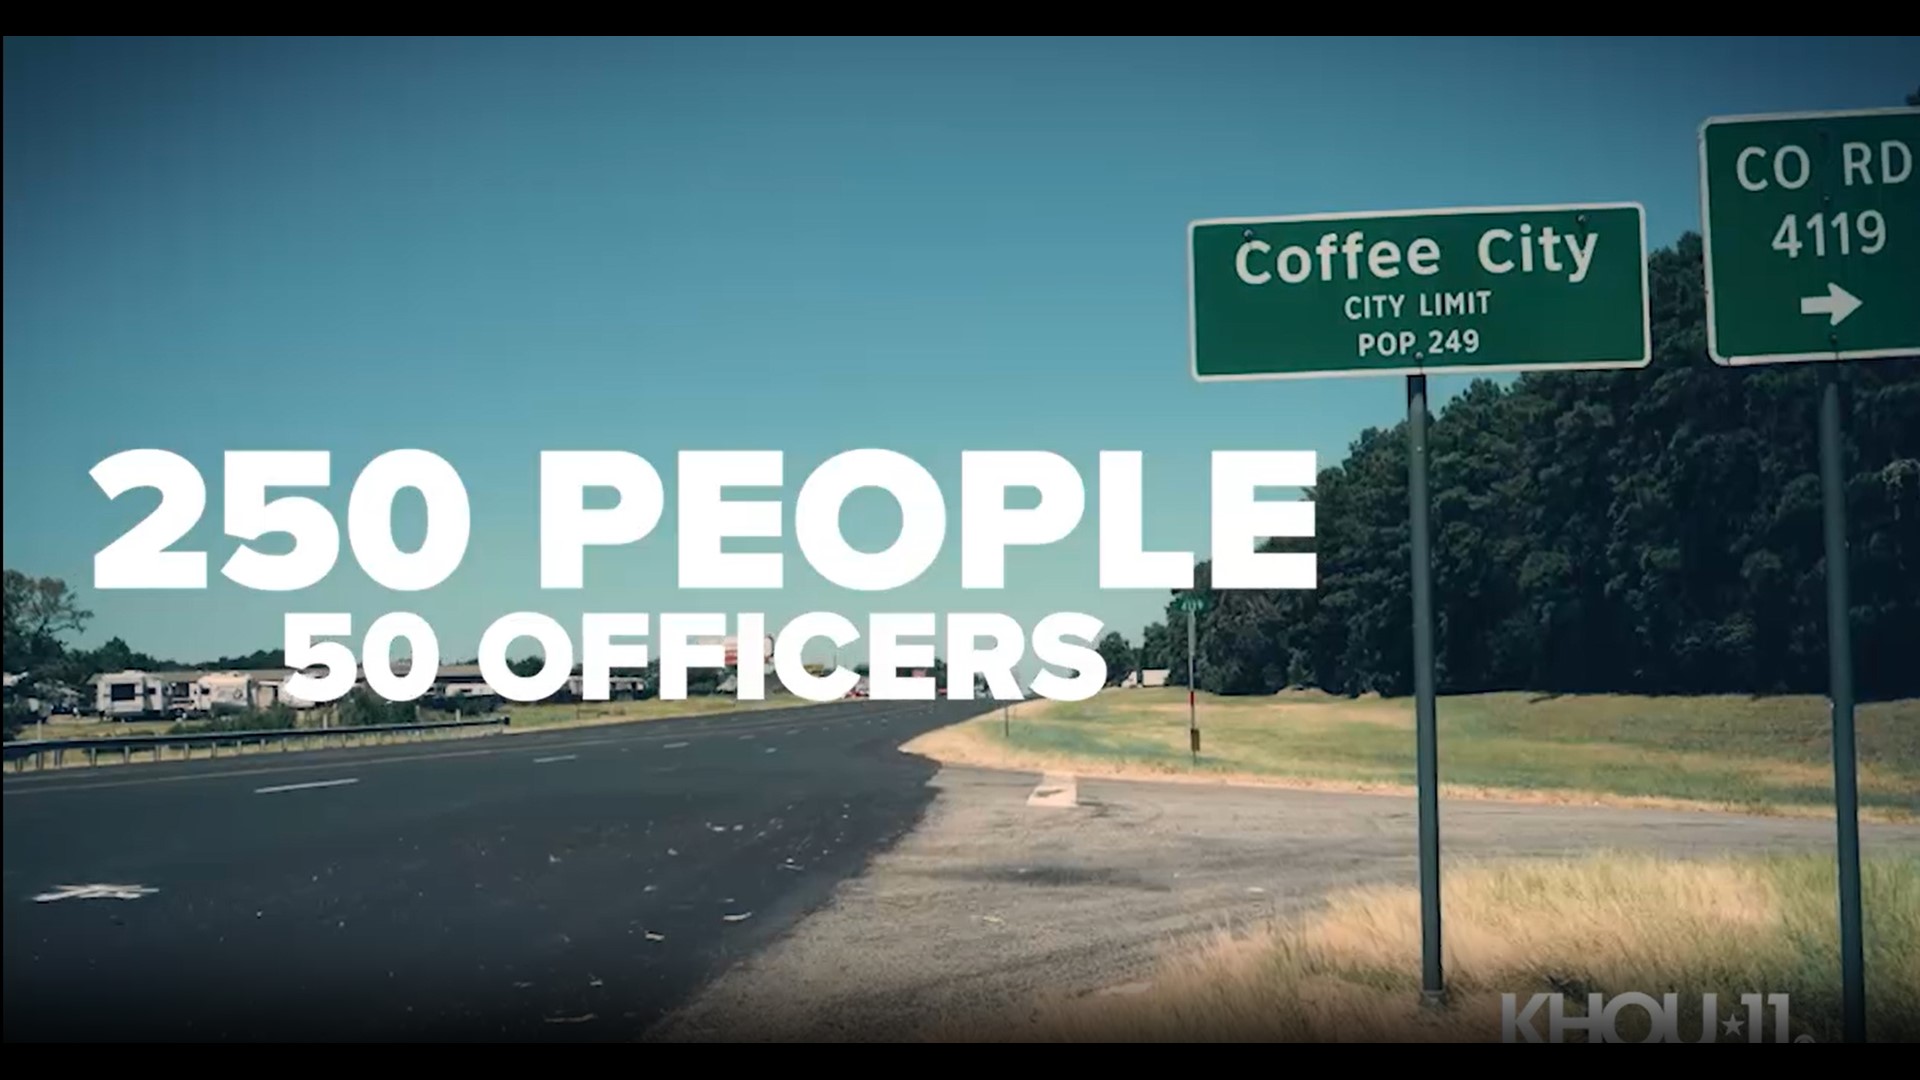 KHOU 11 Investigates discovered more than half of the cops in the Coffee City Police Department had been suspended, demoted or fired from their previous jobs.